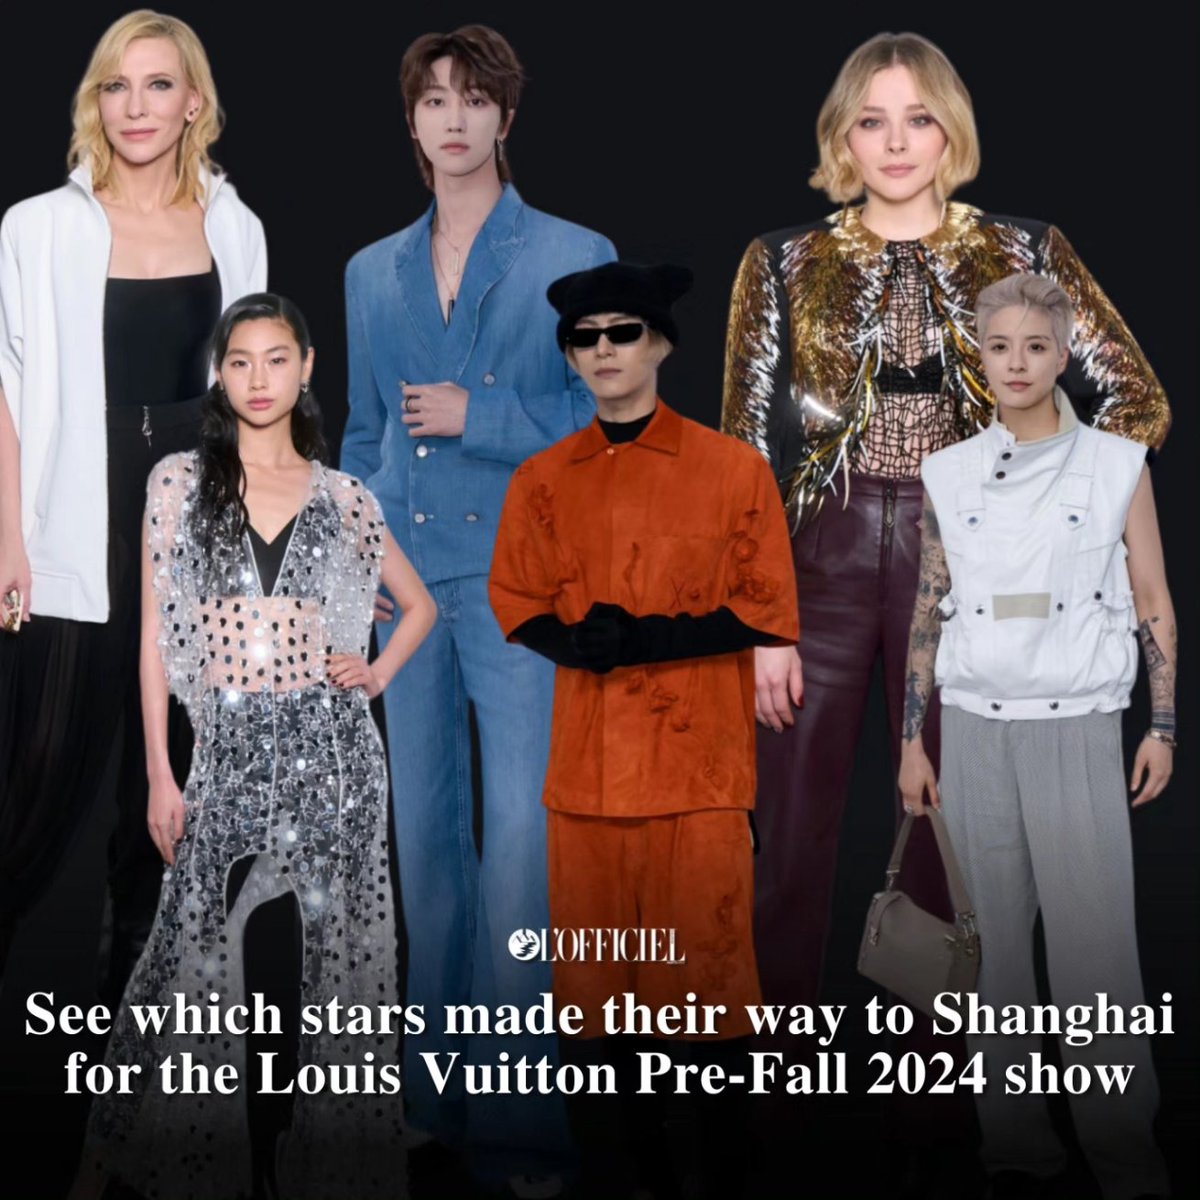 Shanghai was clamouring with excitement for the Louis Vuitton Women's Pre-Fall 2024 show. Find out more: lofficielmalaysia.com/fashion/from-s… #LVPREFALL24 #XUMINGHAOxLOUISVUITTON #JacksonWangLouisVuitton #LouisVuitton #AmberLiu #디에잇 #王嘉爾 #徐明浩